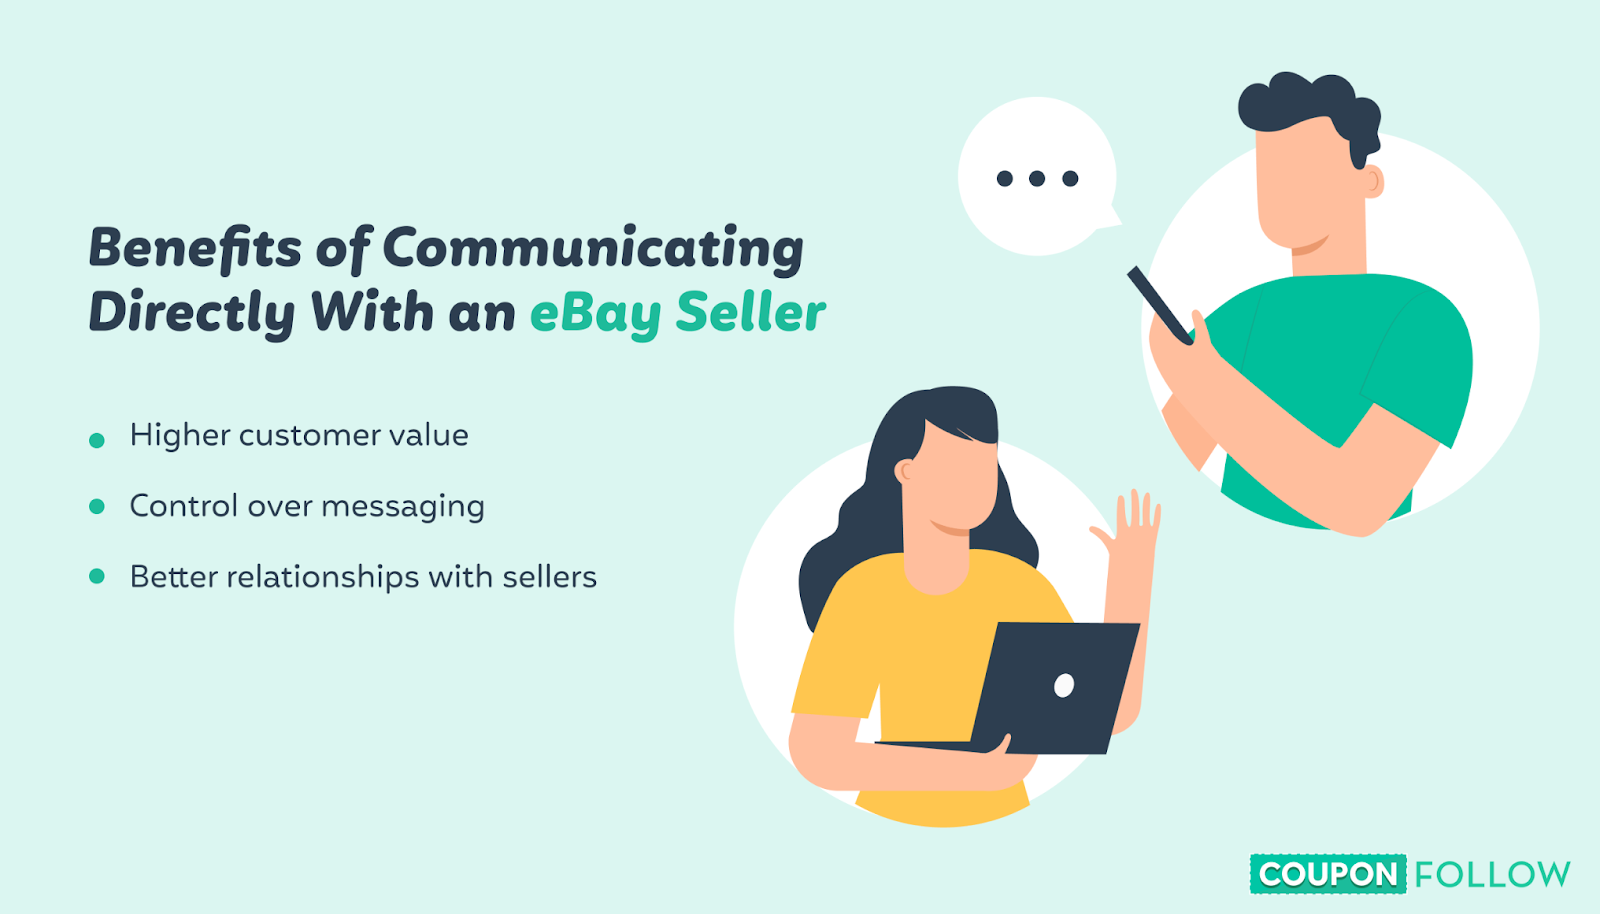 image showing the benefits for eBay customers when they communicate directly with sellers